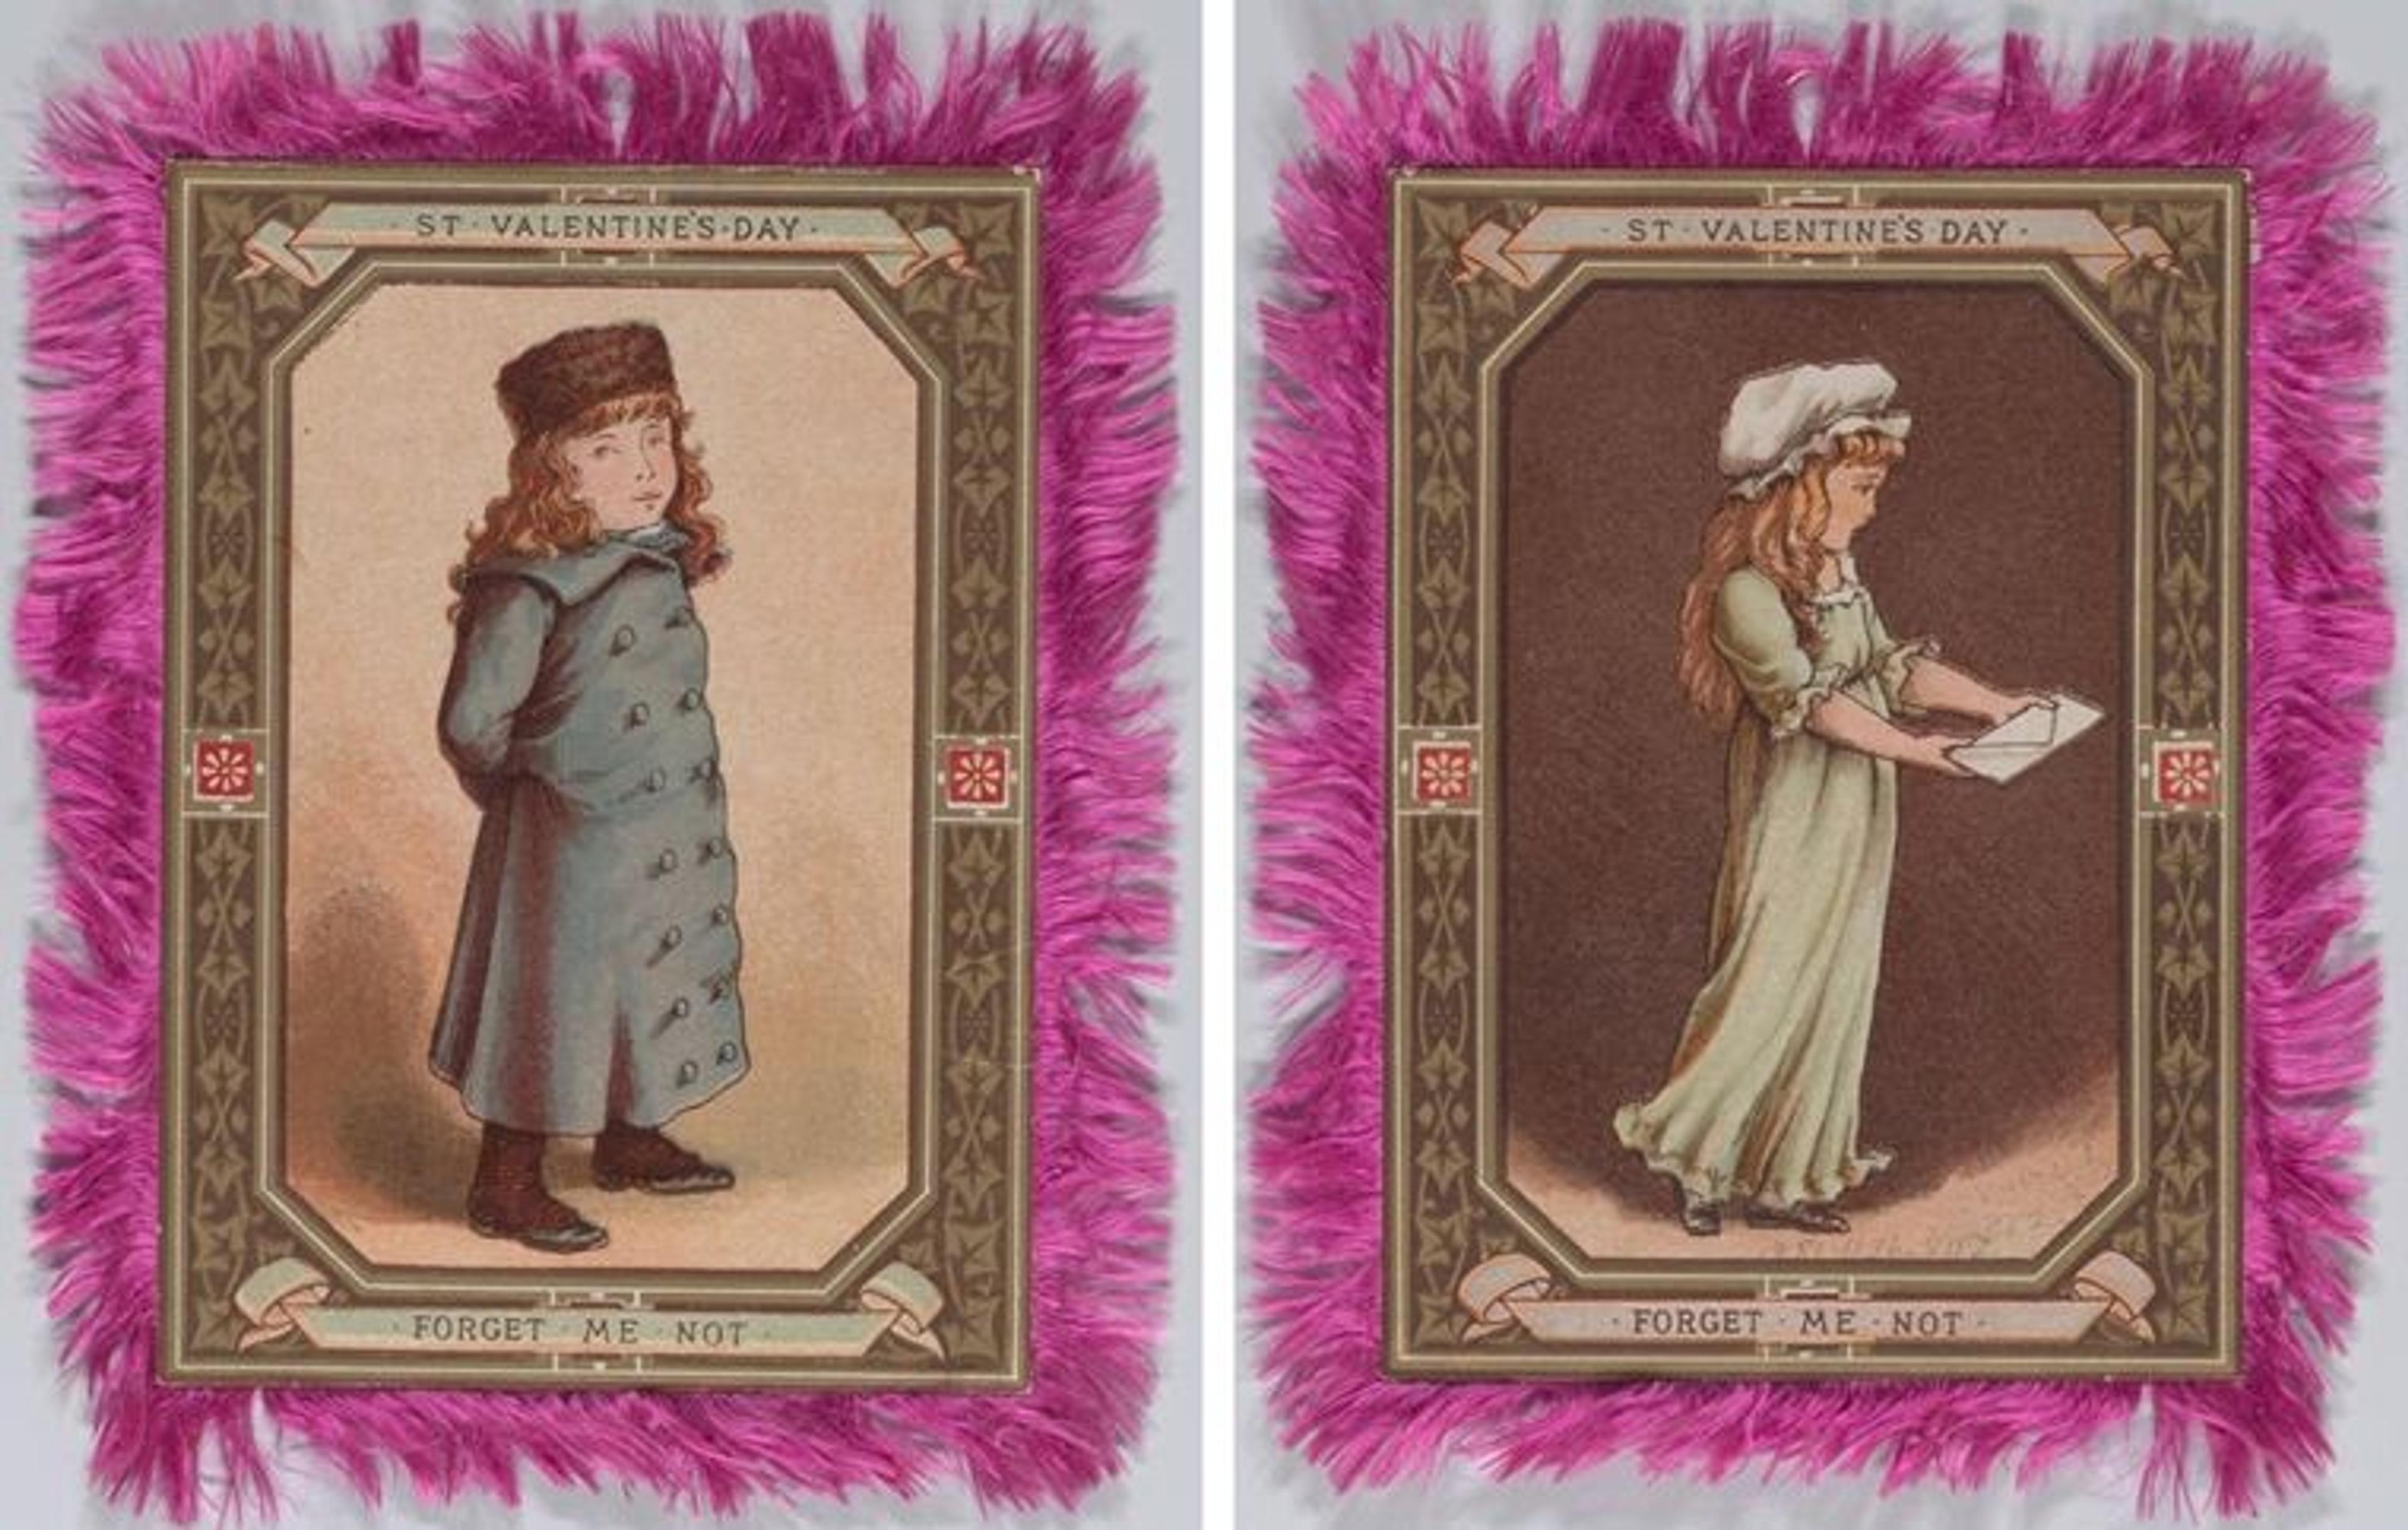 Two Kate Greenaway valentines depicting children receiving a card. Around the border is magenta silk fringe and the text "St. Valentine's Day | Forget Me Not"